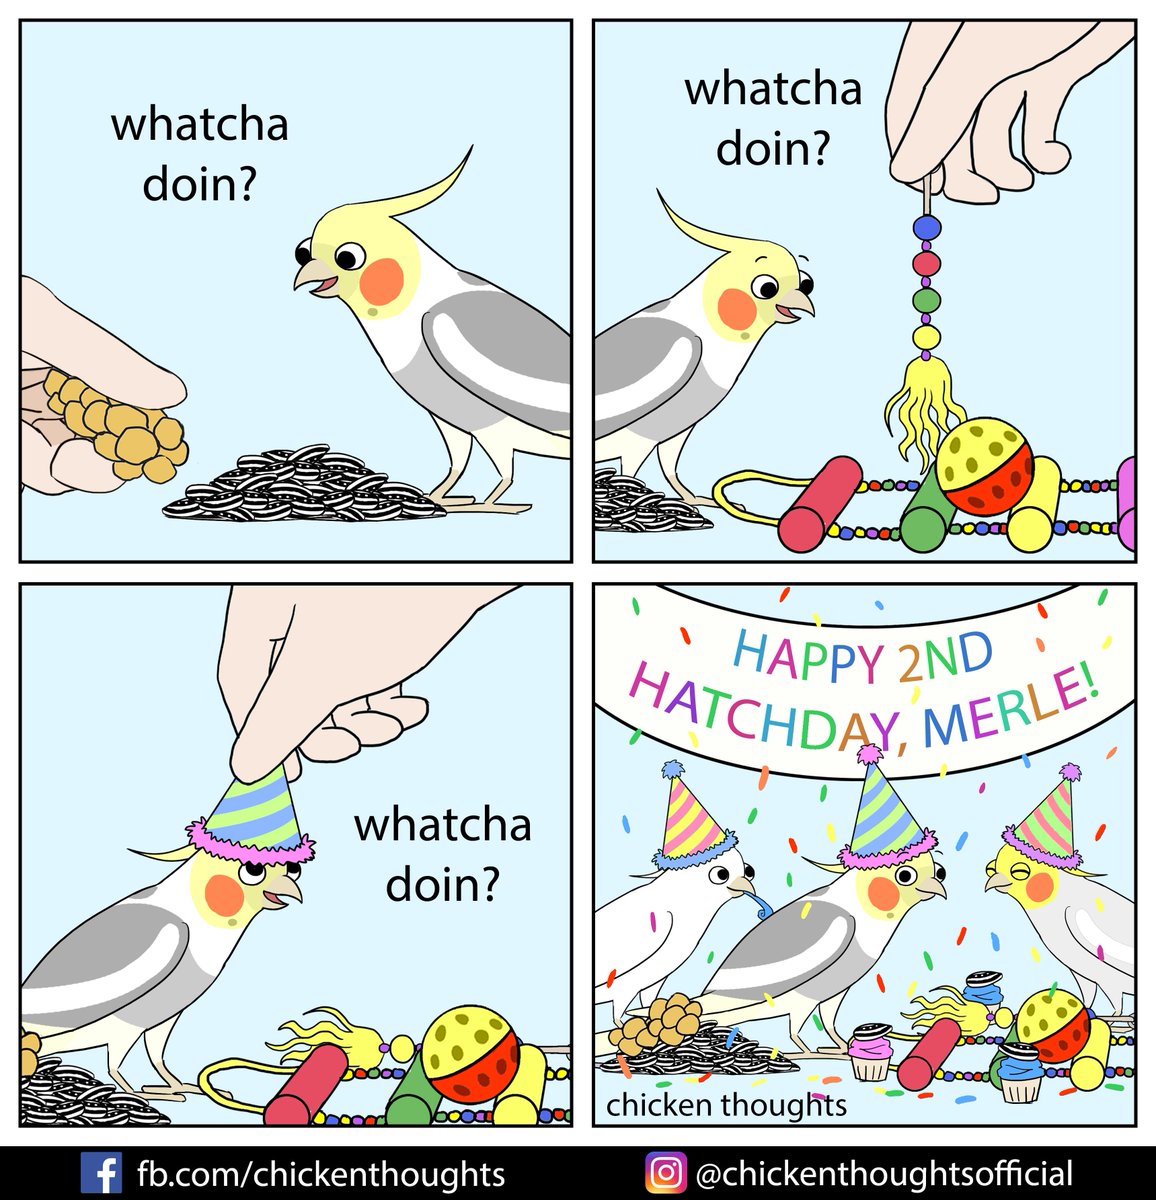 Happy Hatchday to our fren Merle the Talking 'Tiel who brings us smiles every day! We love you! https://t.co/Wr5BZev6rV 